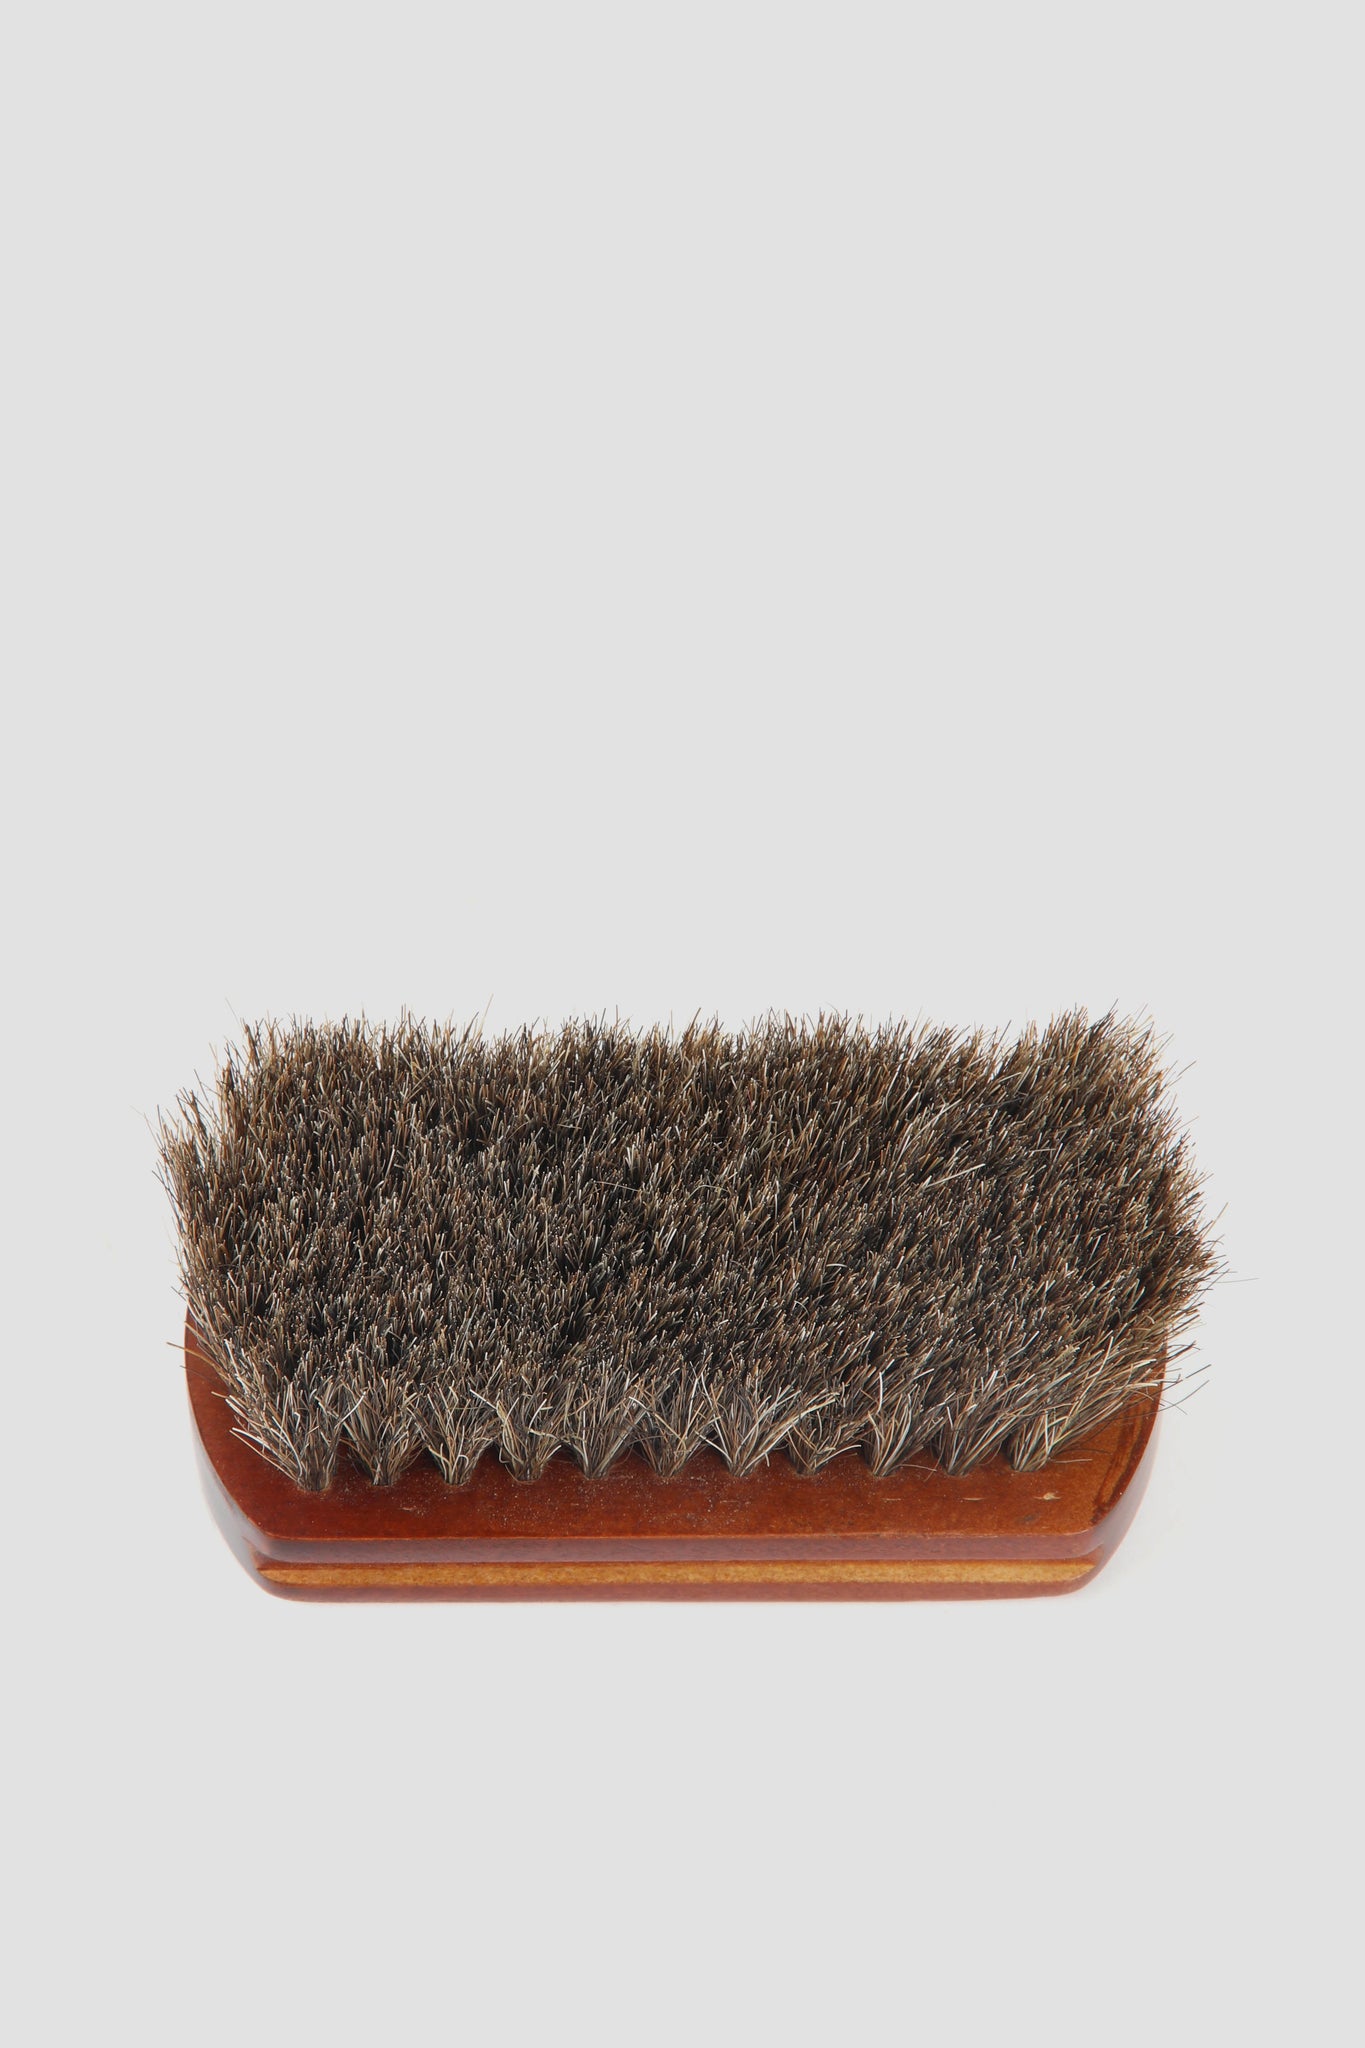 Small Wooden Shoe brush